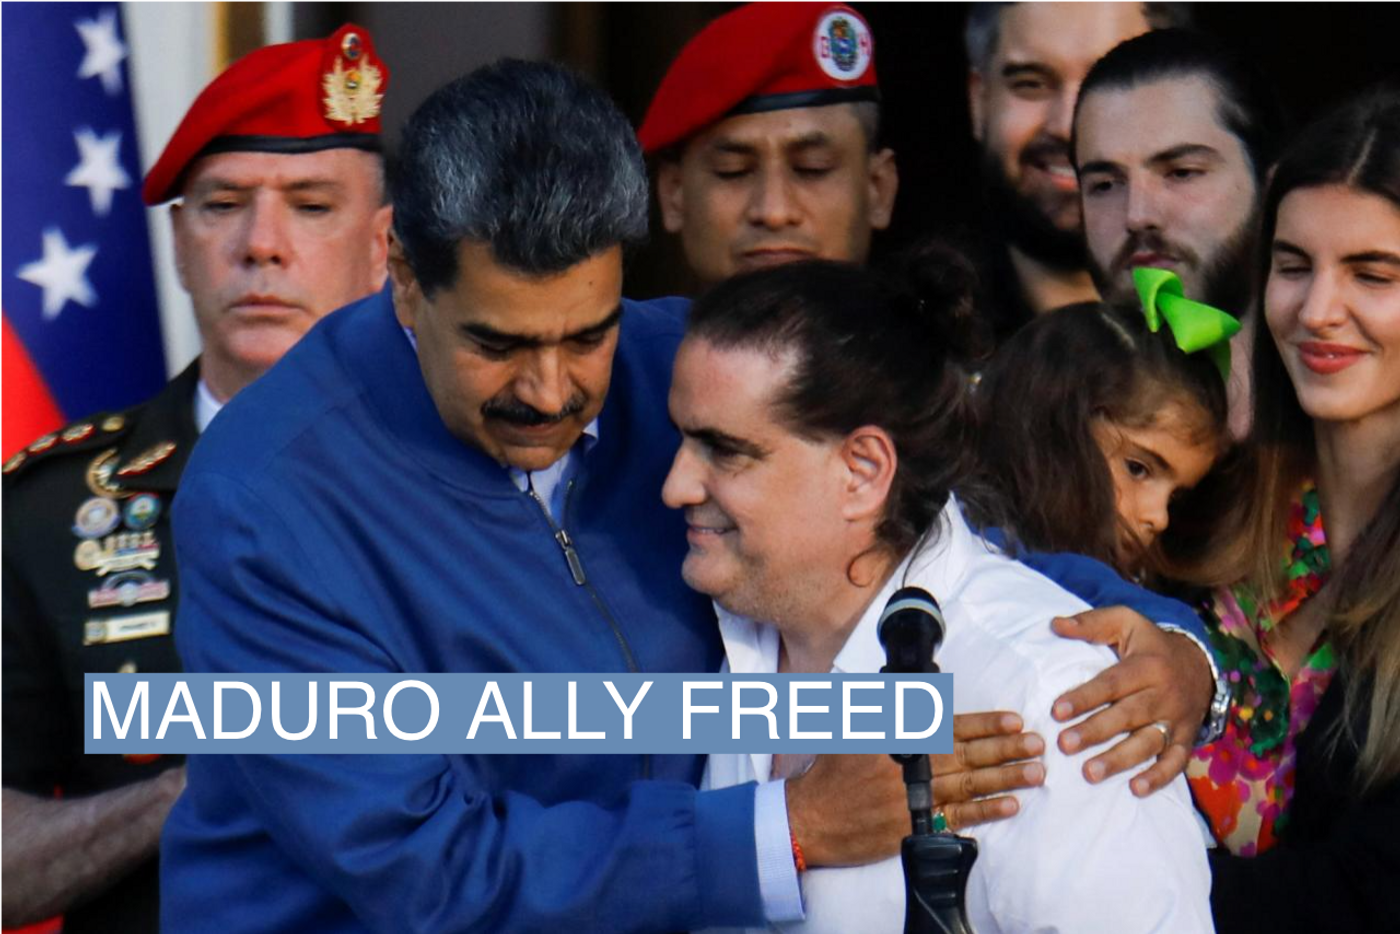 Venezuelan President Nicolás Maduro embraces Alex Saab, who was facing U.S. bribery charges, after he was released by the U.S. government, at the Miraflores Palace, in Caracas, Venezuela, December 20, 2023